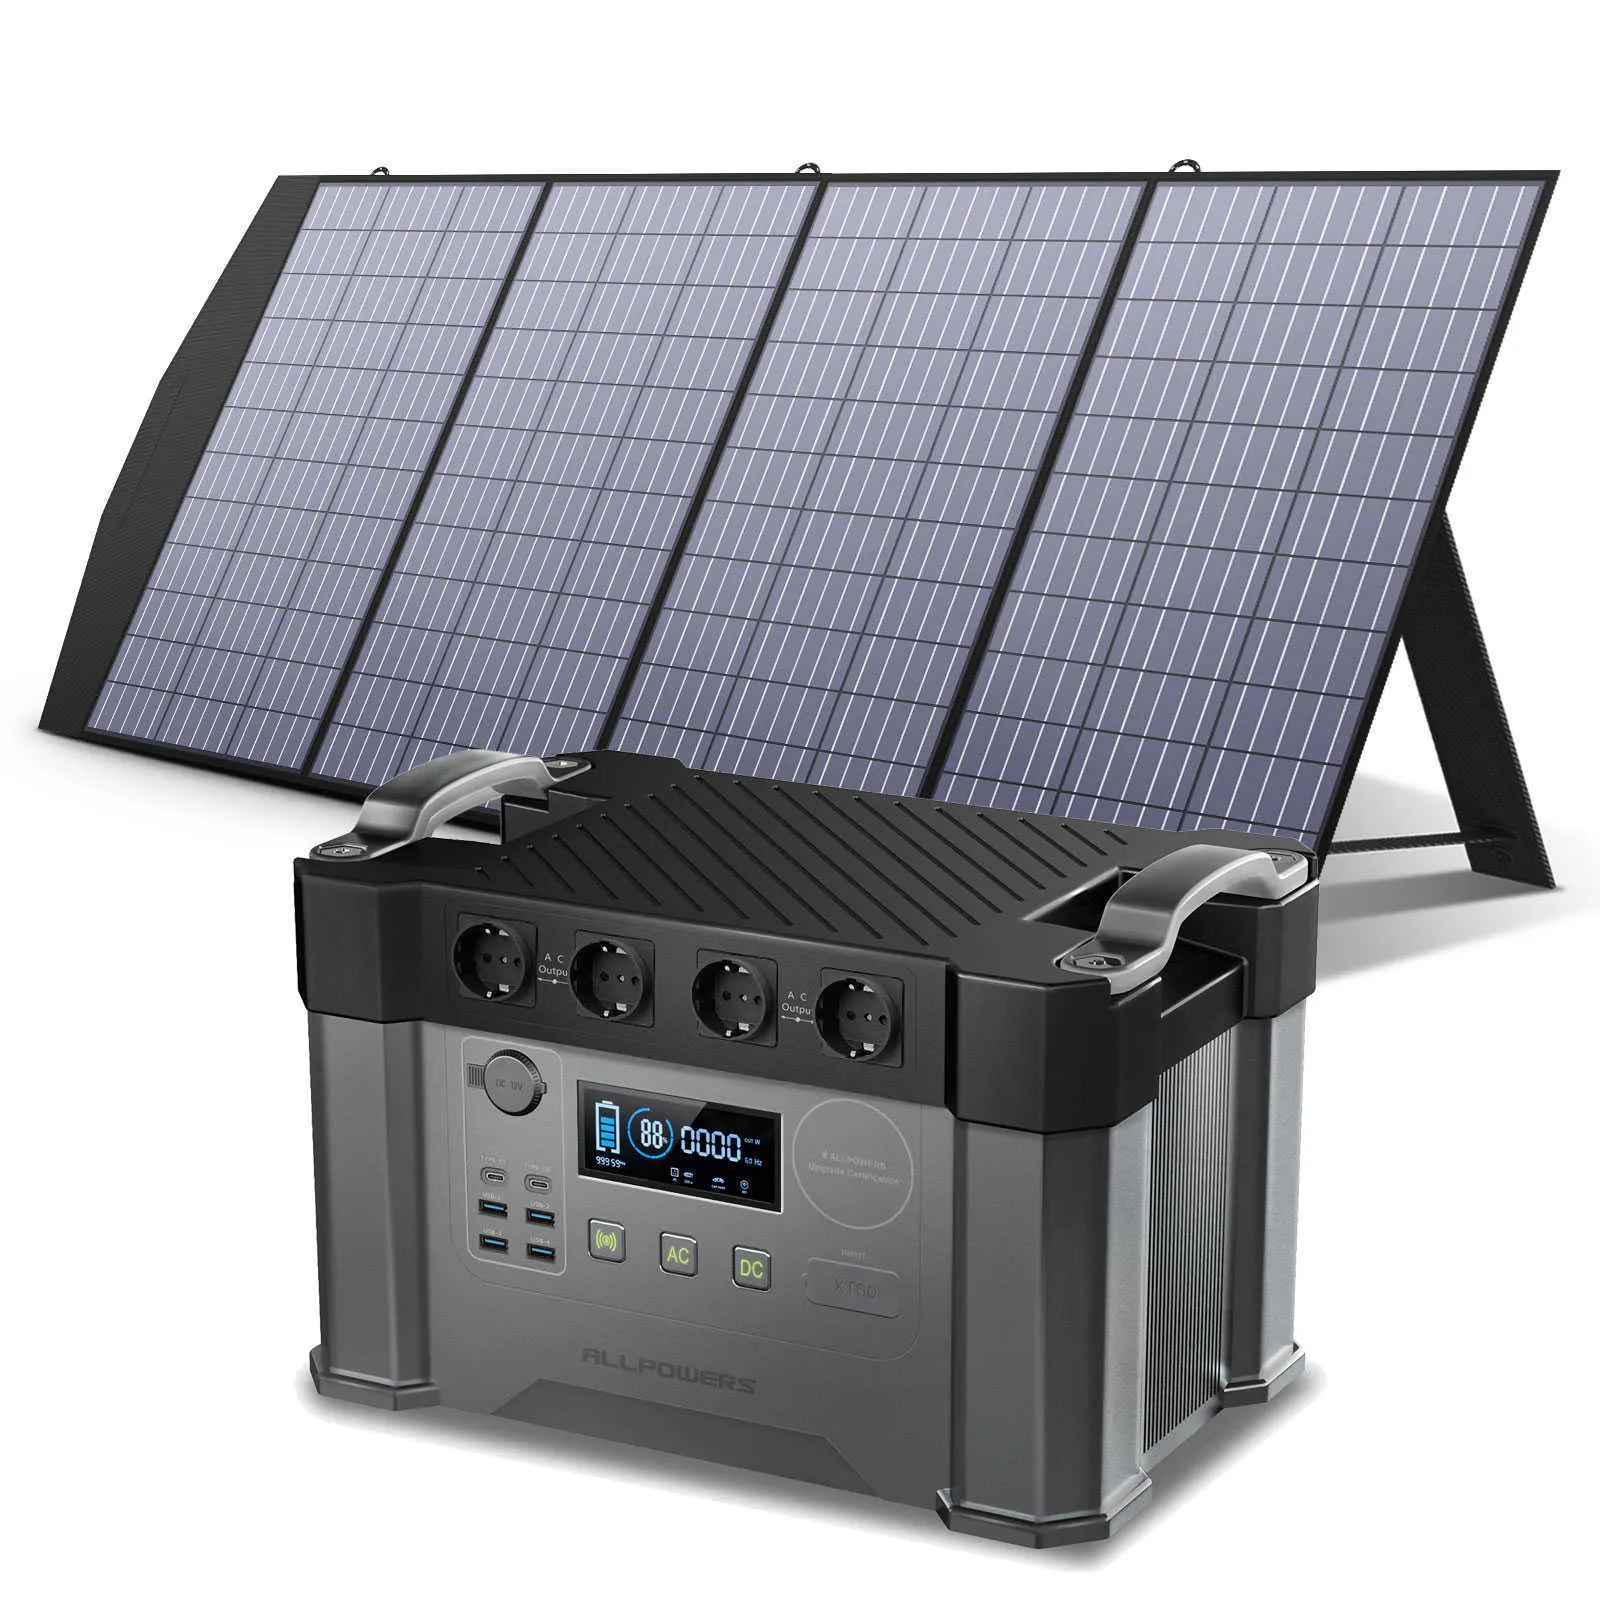 ALLPOWERS Portable Power Station 110/230V Home/Outdoor Emergency Backup Power700W / 2000W Solar Generator With 200W Solarpanel